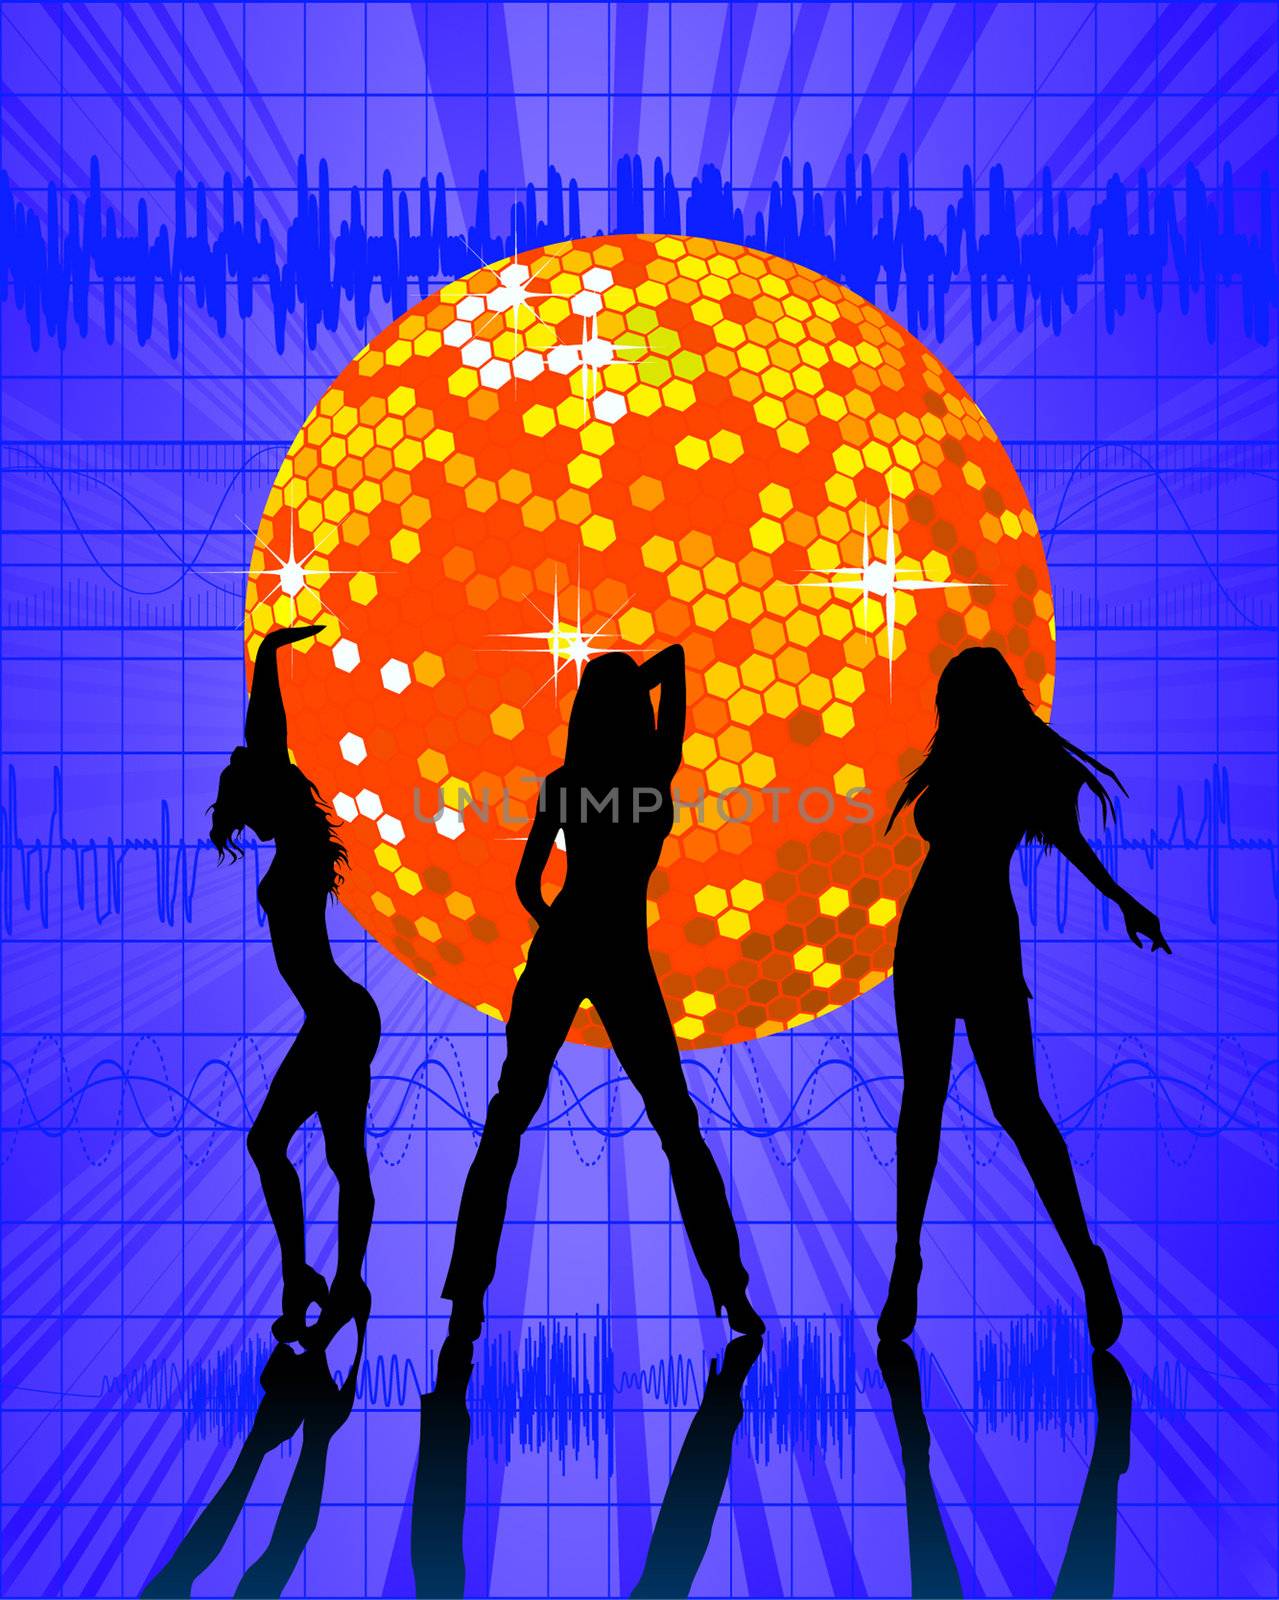 Disco music party by Lirch